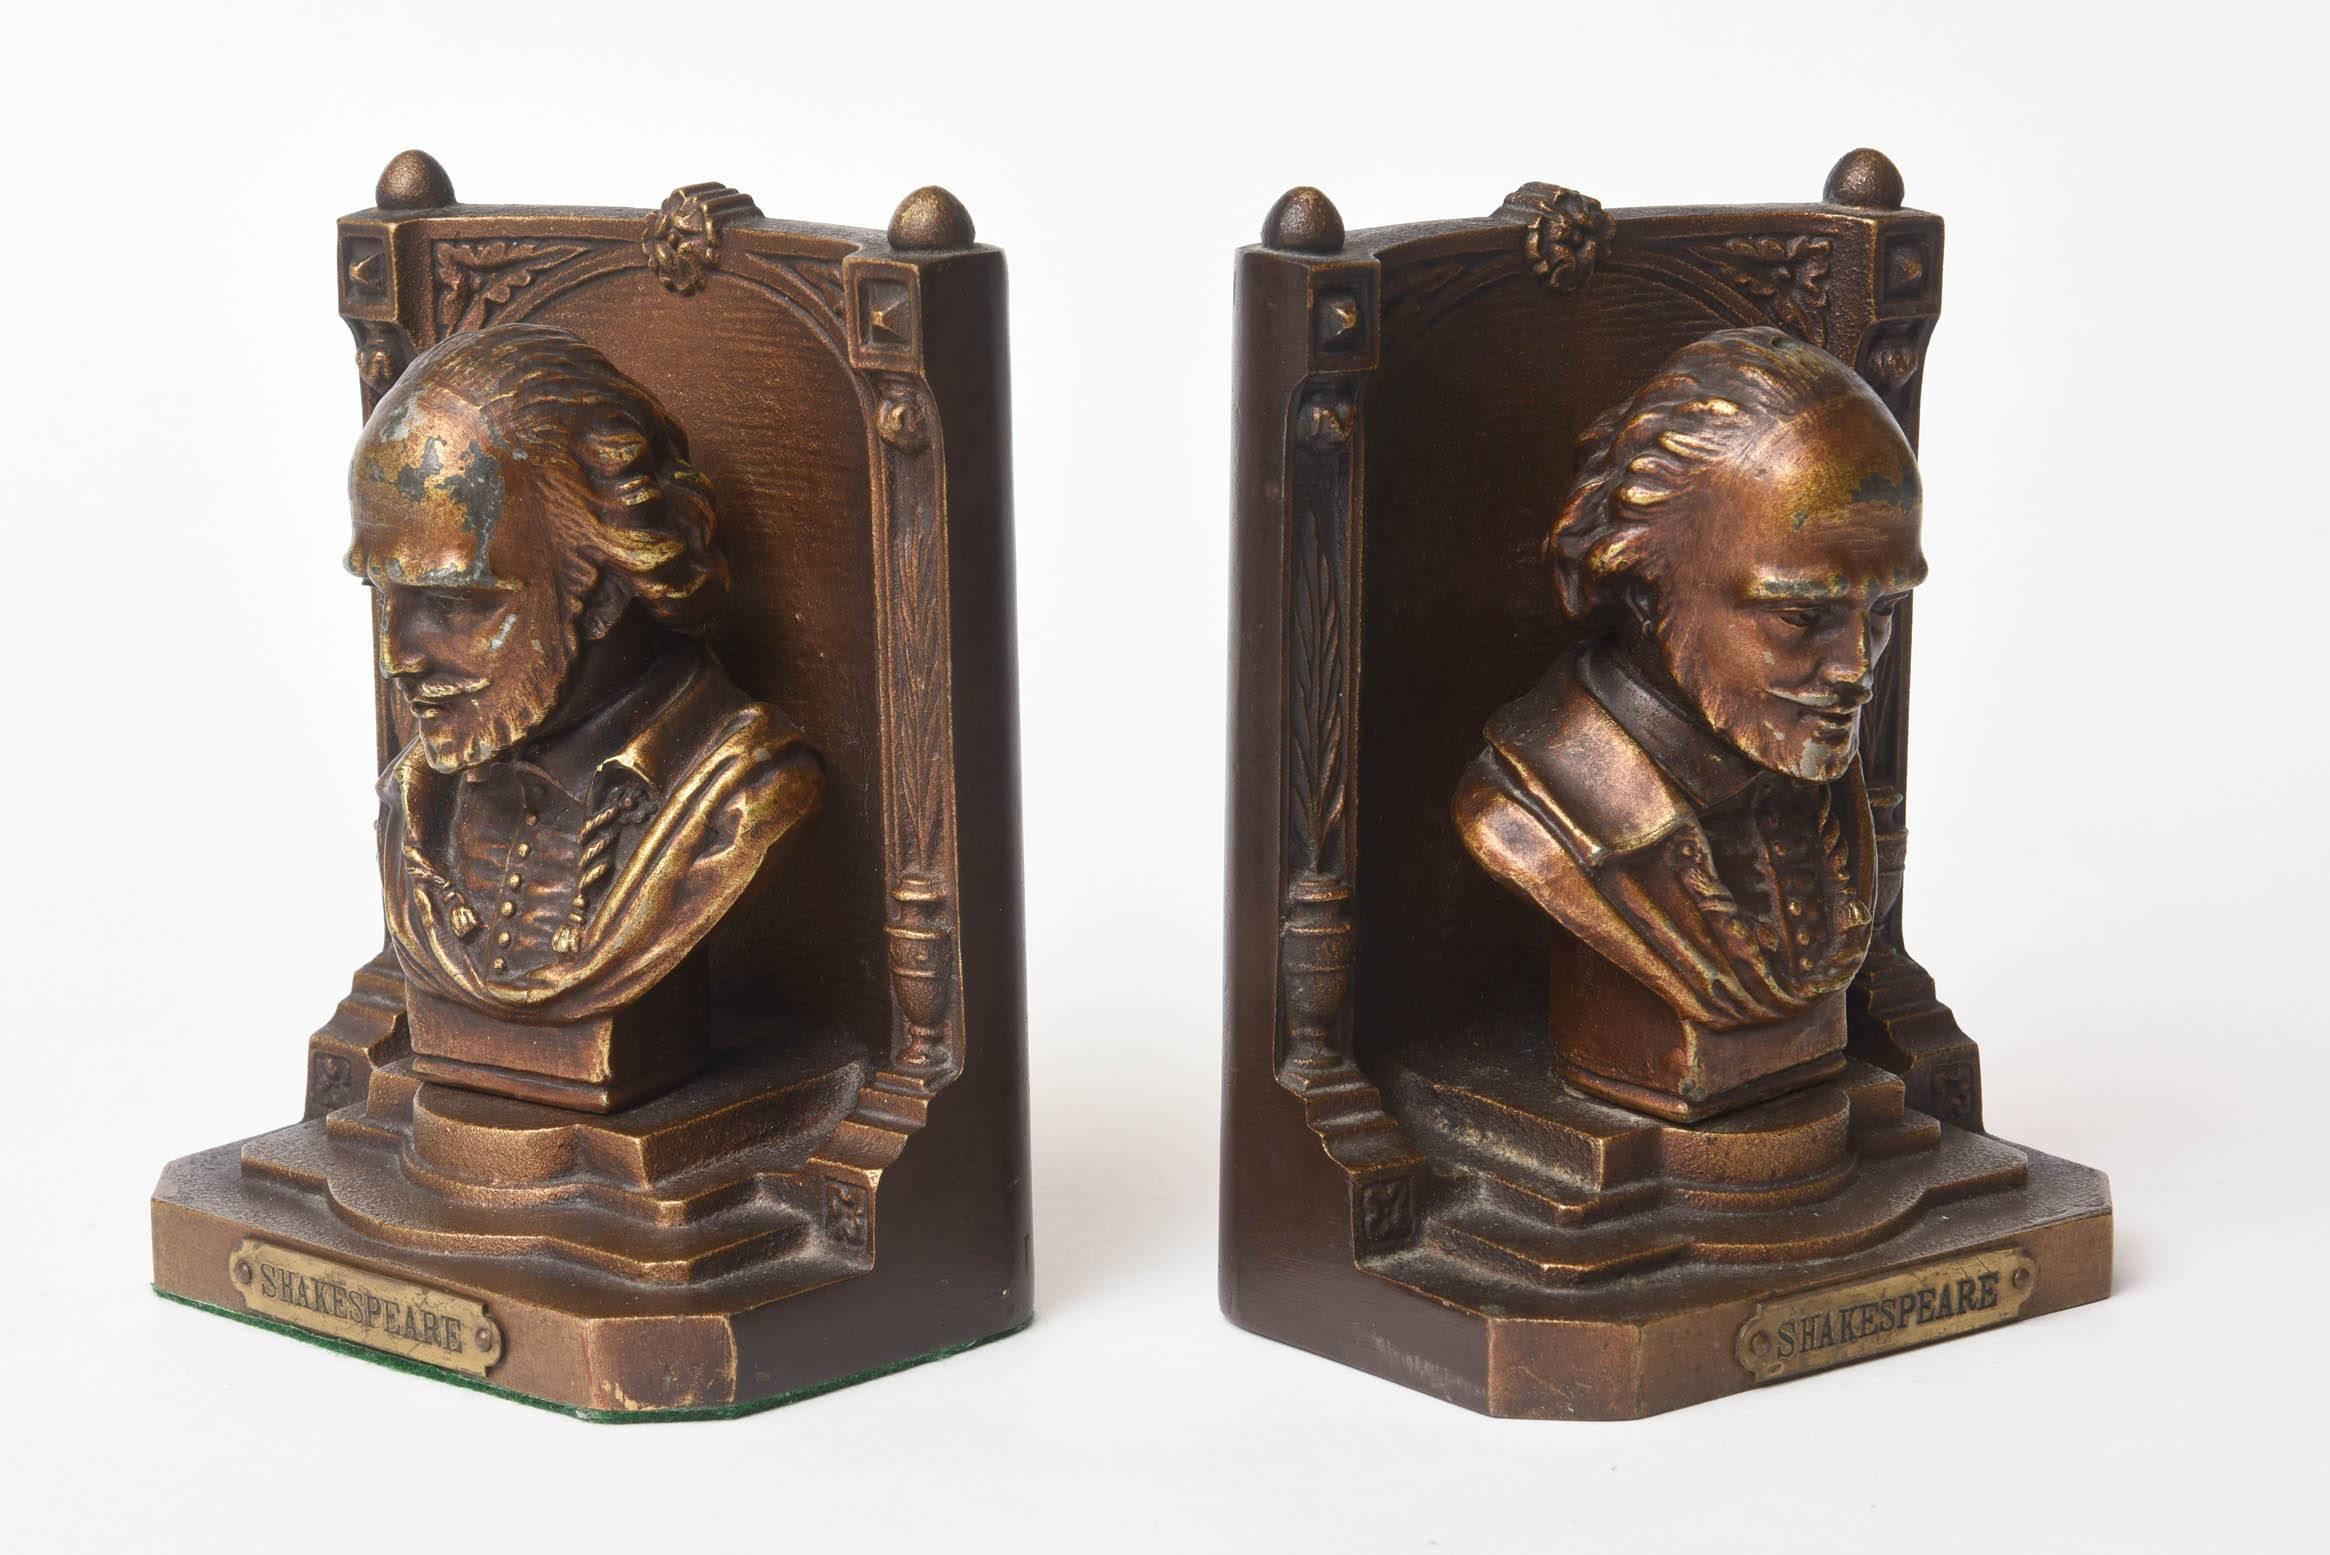 From a beautiful estate library a pair of heavy and detailed book ends with nice patina. Signed and circa 1920 from Bradley & Hubbard. A bust of Shakespeare in full relief is set into a niche; a brass label engraved with the name Shakespeare is